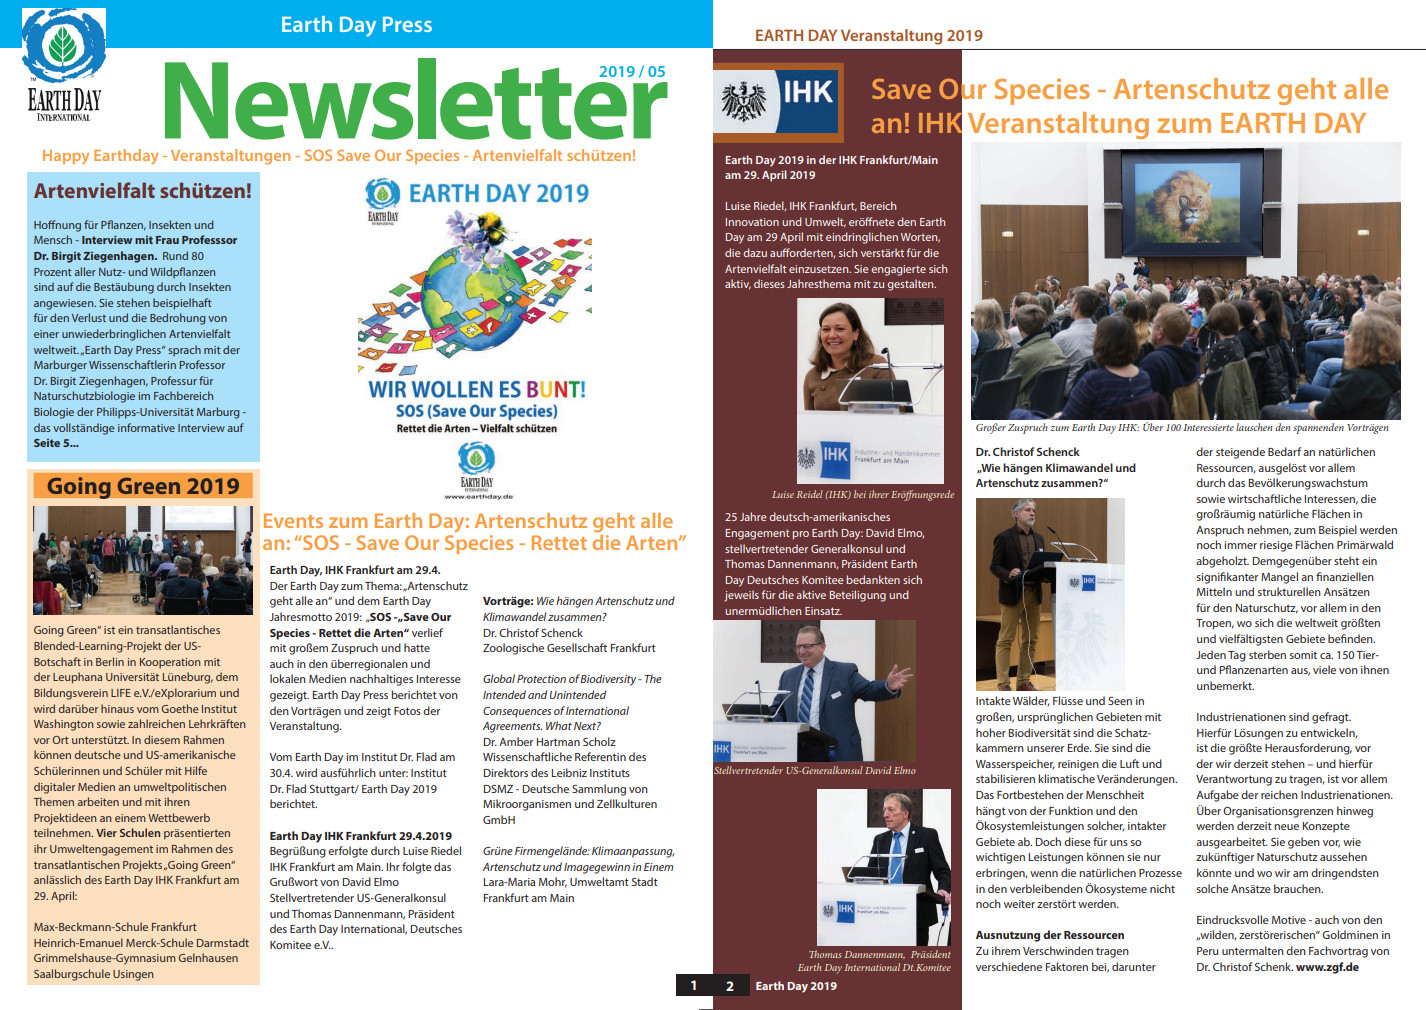 Earth Day Press Newsletter 05/2019